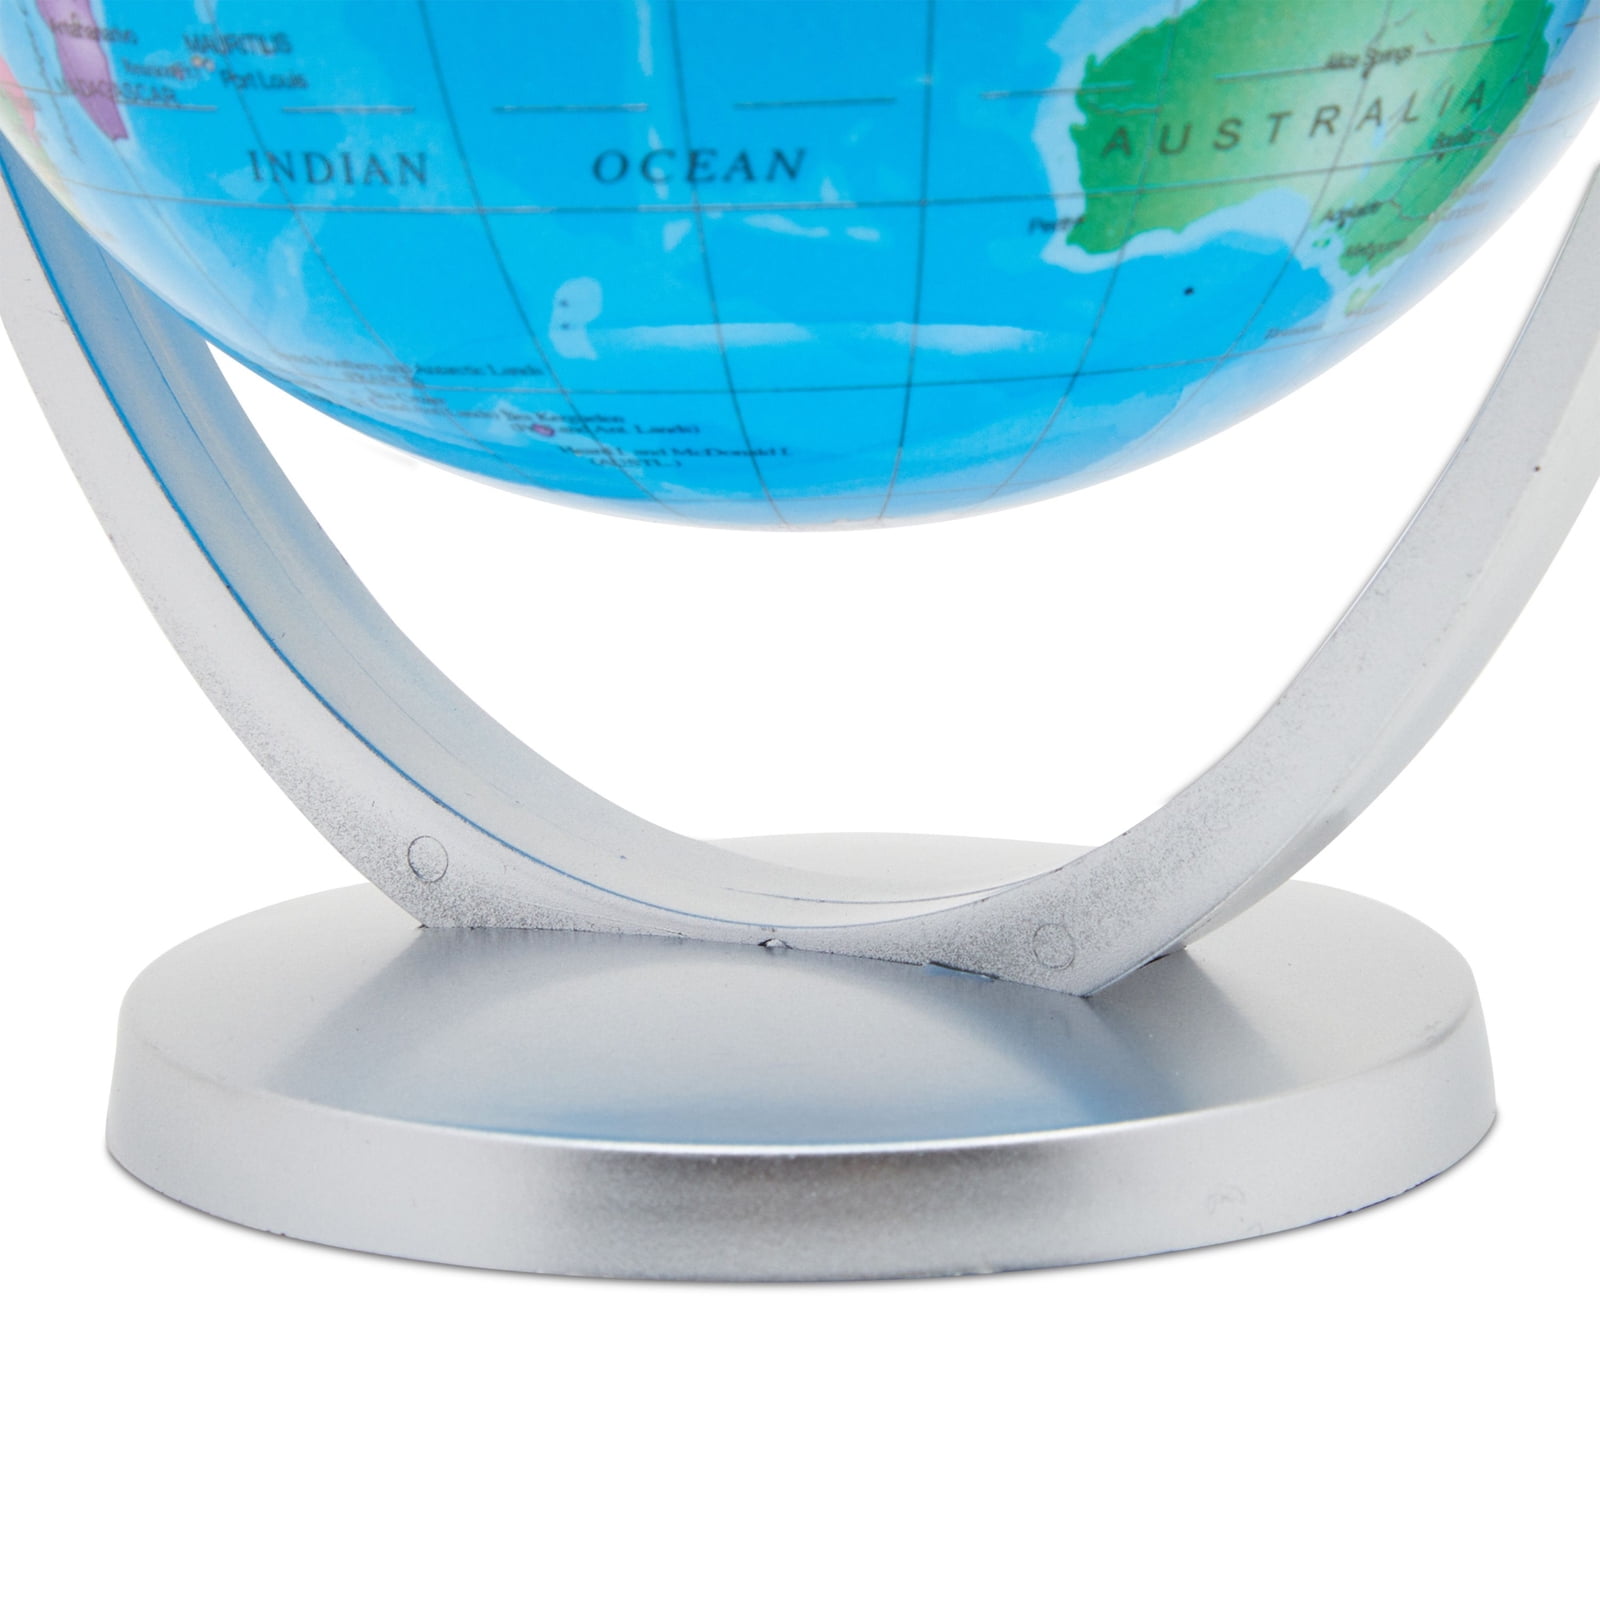 Small Spinning World Globe with Stand for Kids Children, Educational  Geography Classroom Students & Teachers, 5 inch